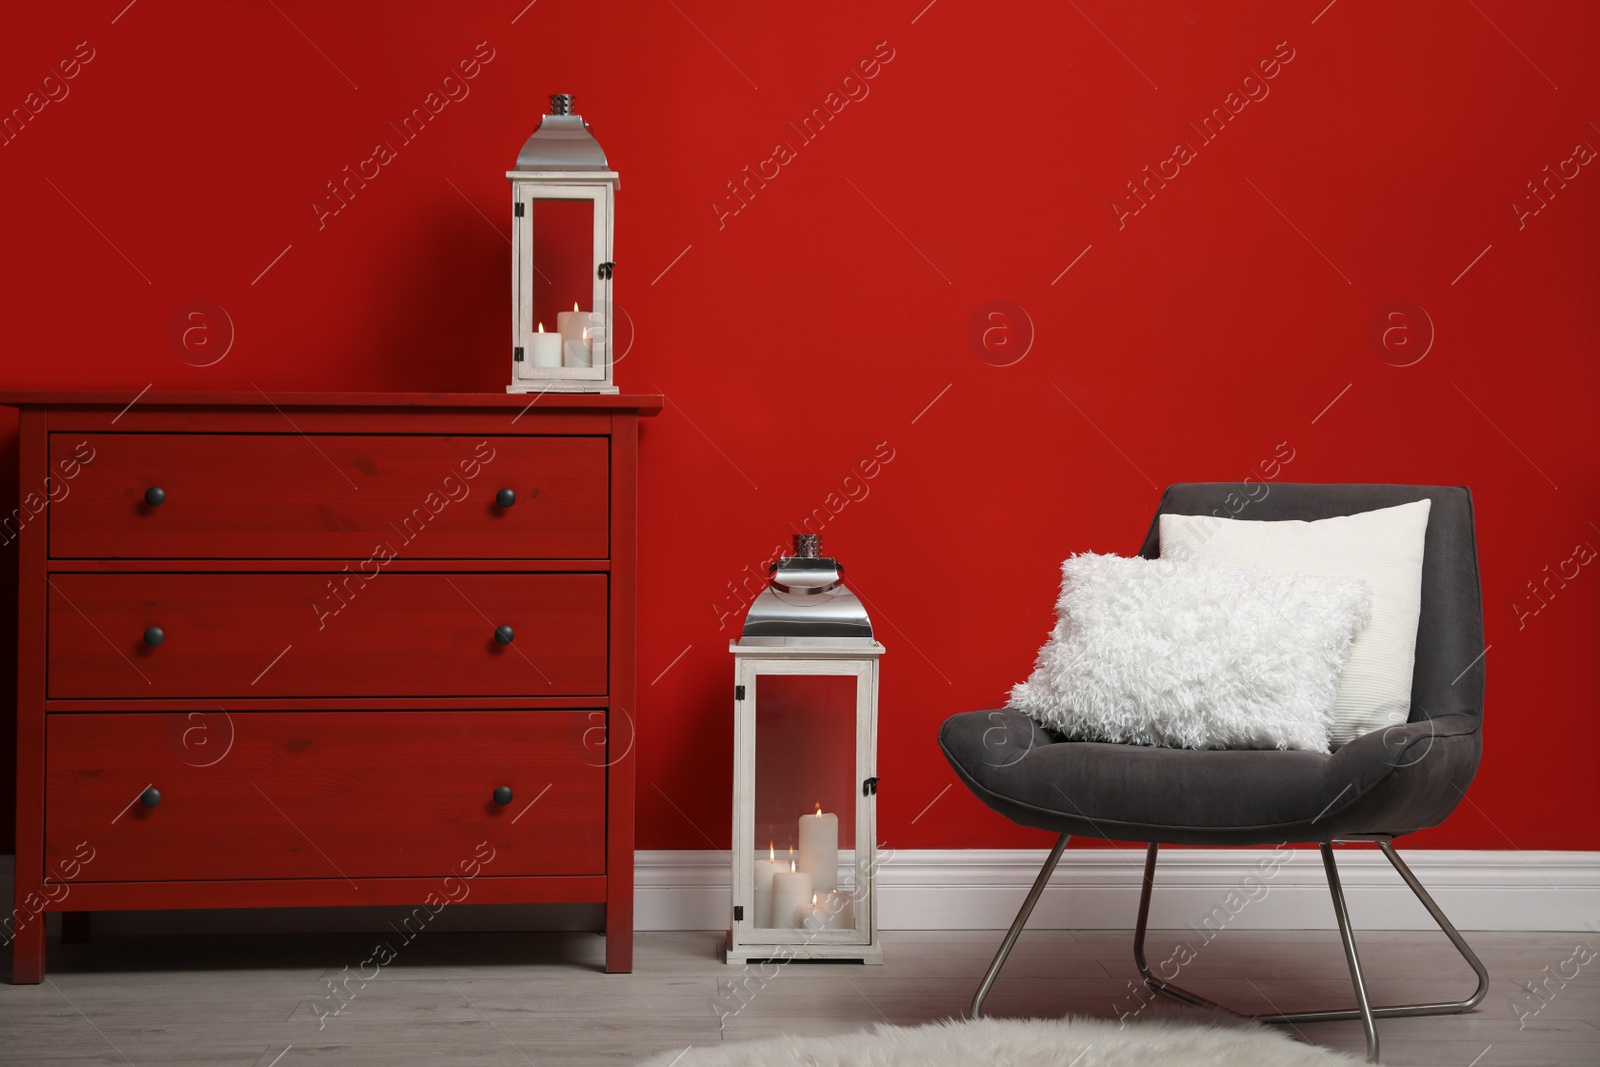 Photo of Soft pillows on armchair near red wall in room